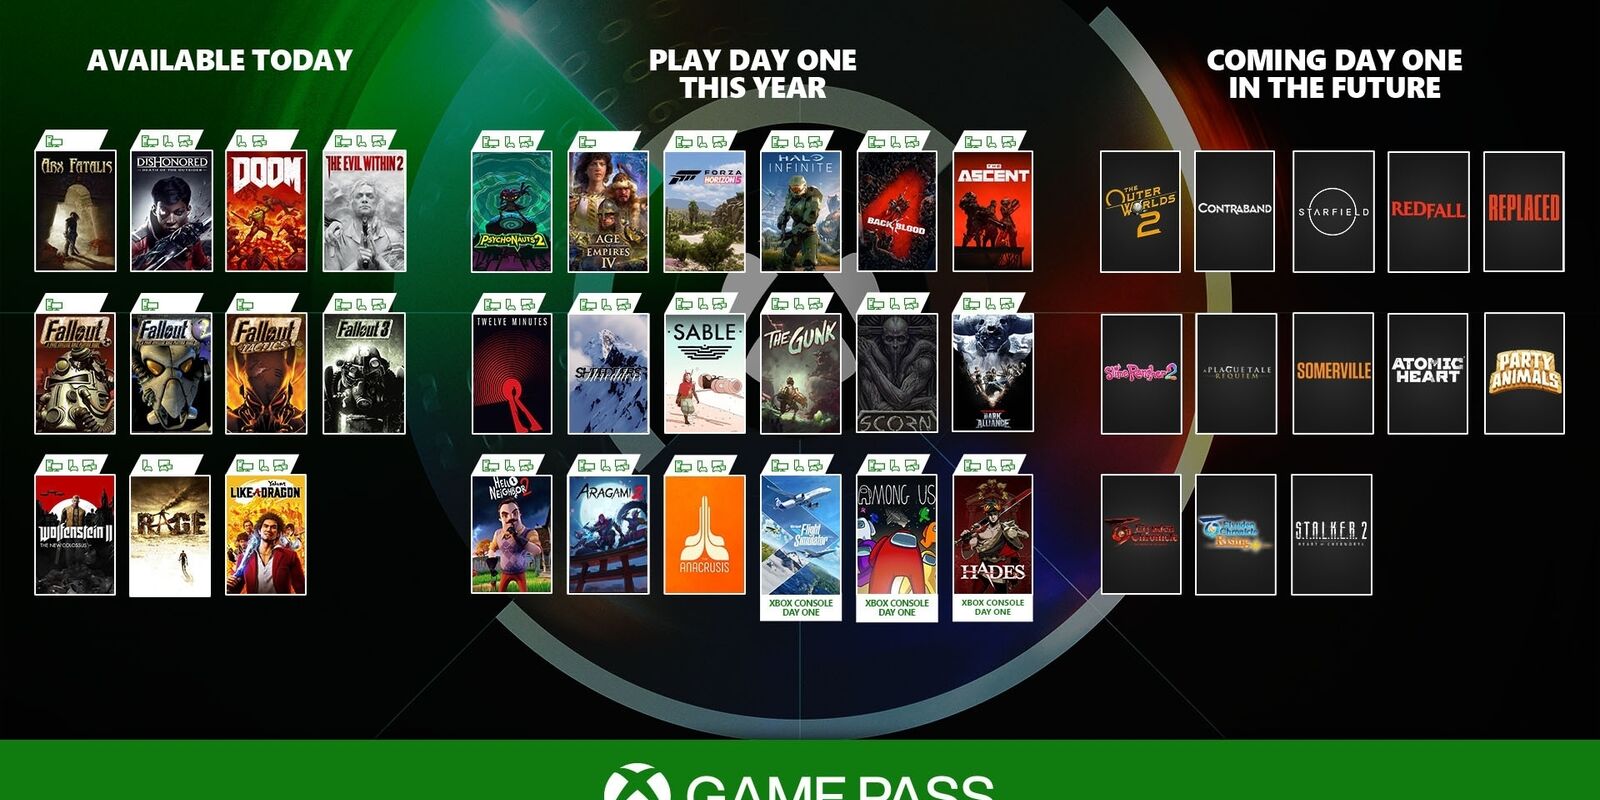 Microsoft announces 50+ titles for Xbox Game Pass